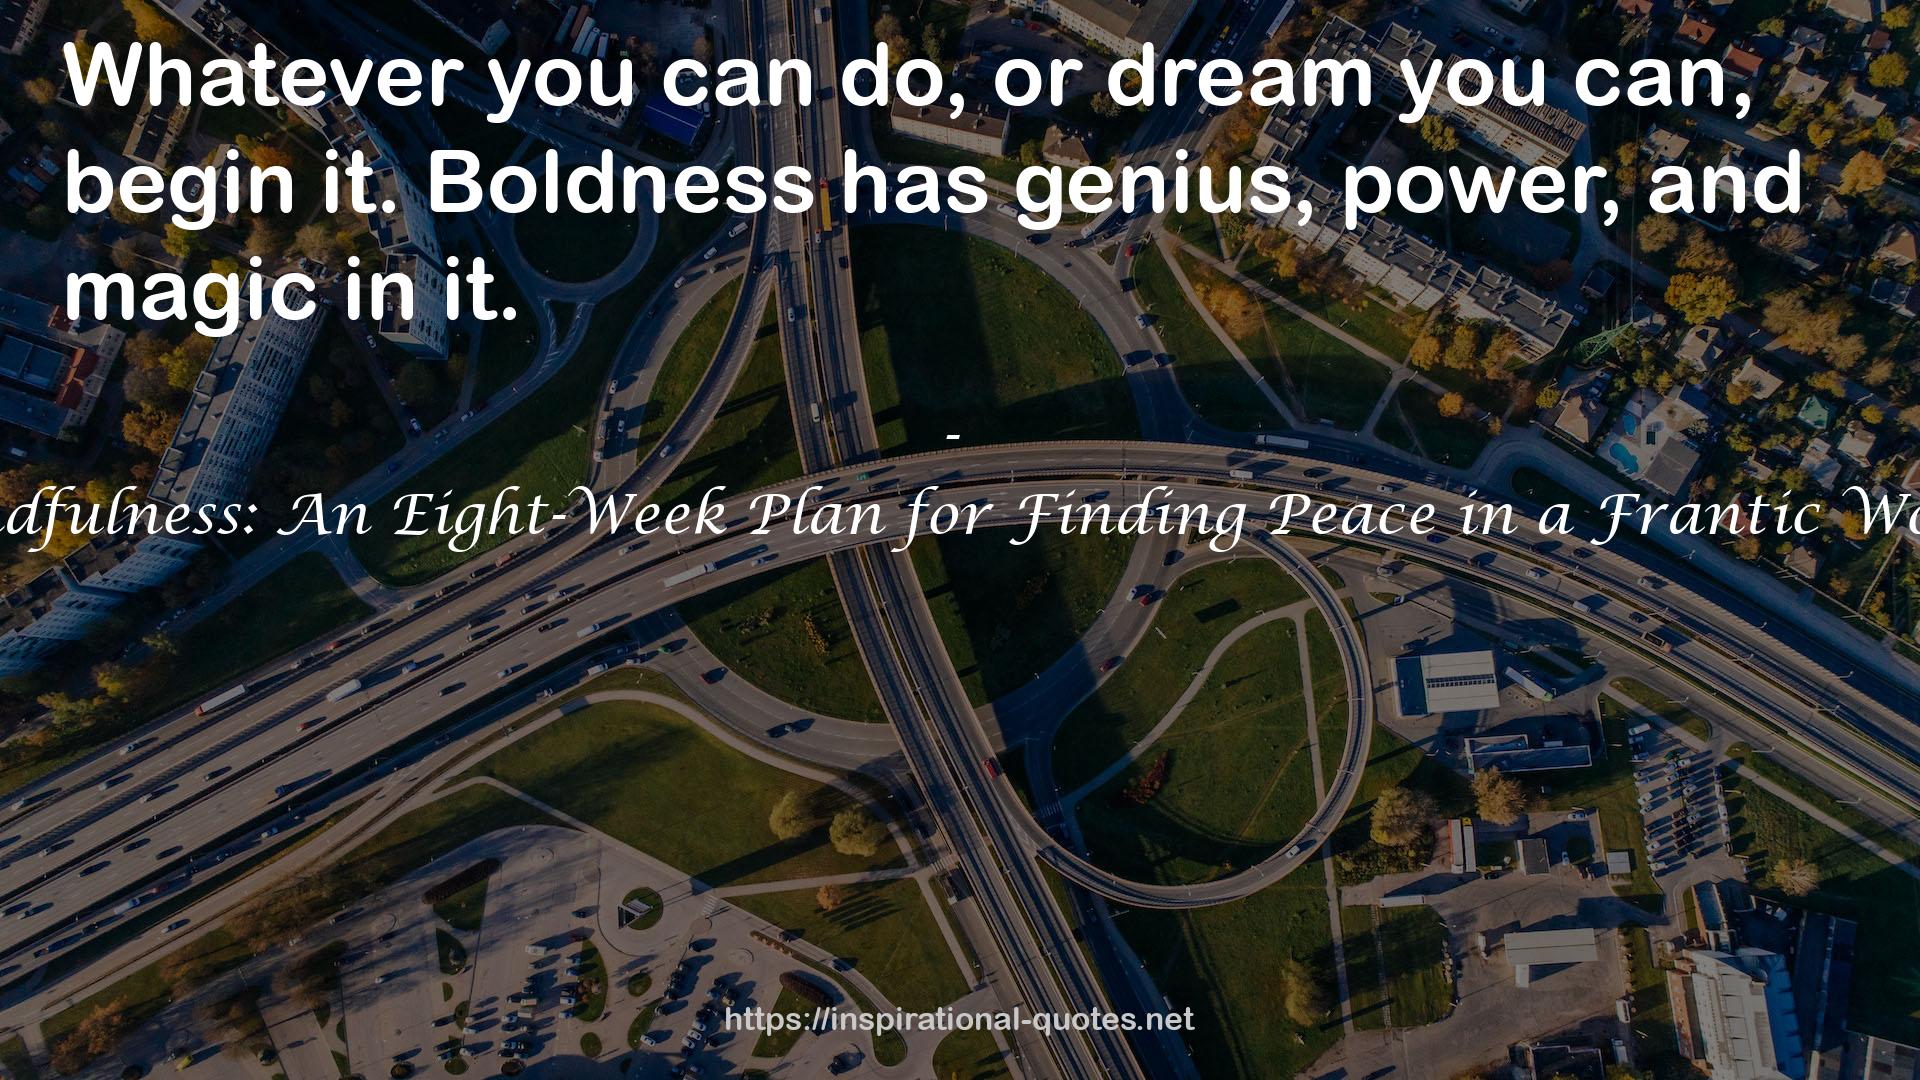 Mindfulness: An Eight-Week Plan for Finding Peace in a Frantic World QUOTES